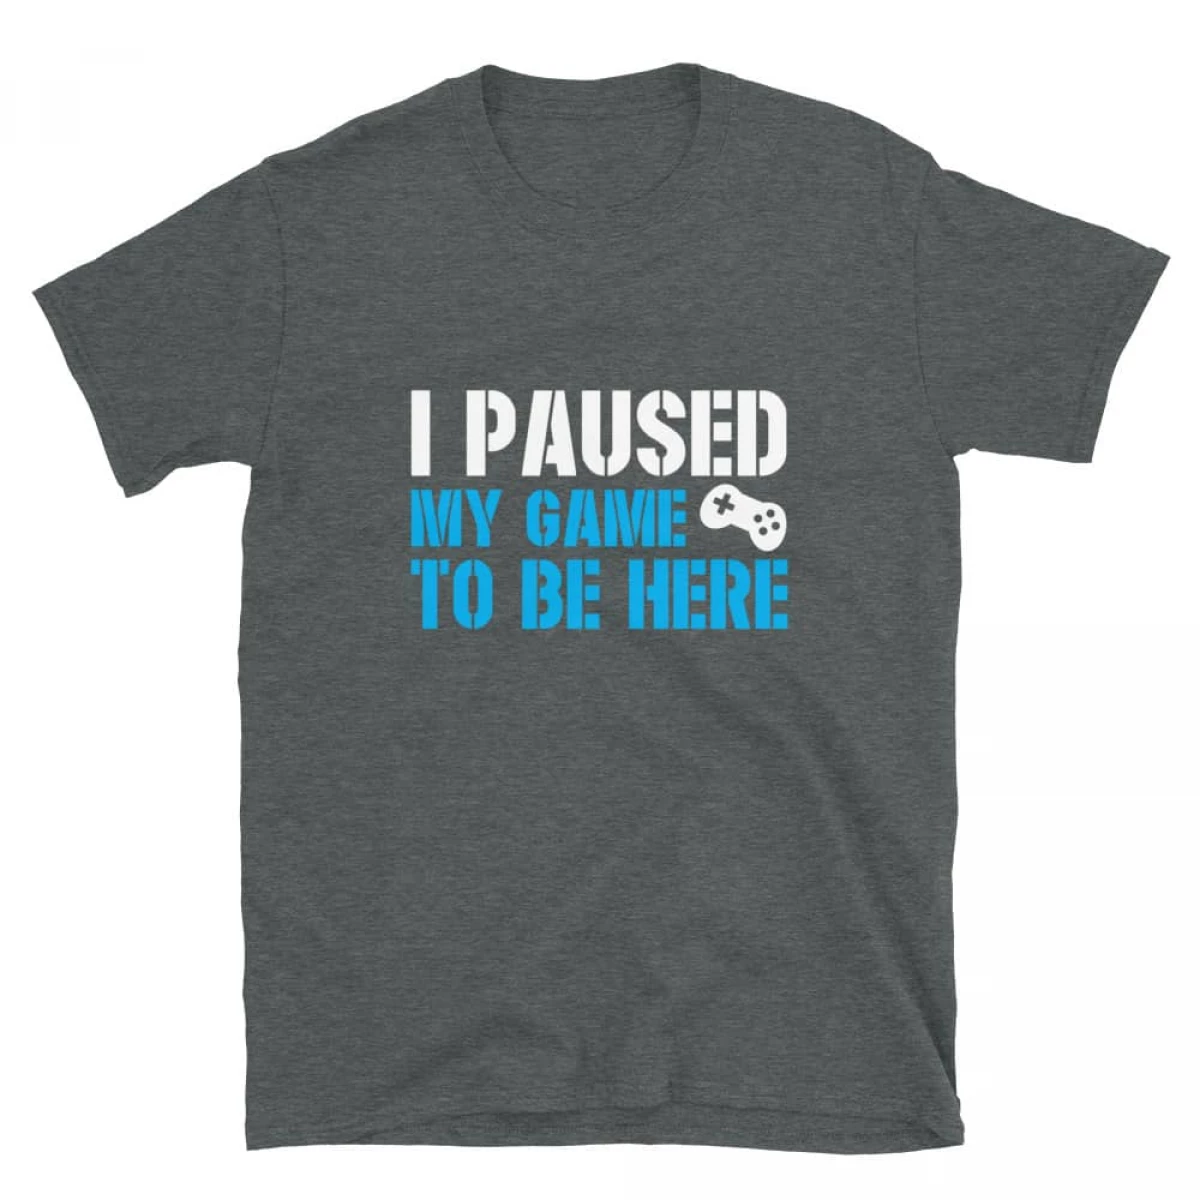 Loudpig I Paused my Game to be here t-shirt